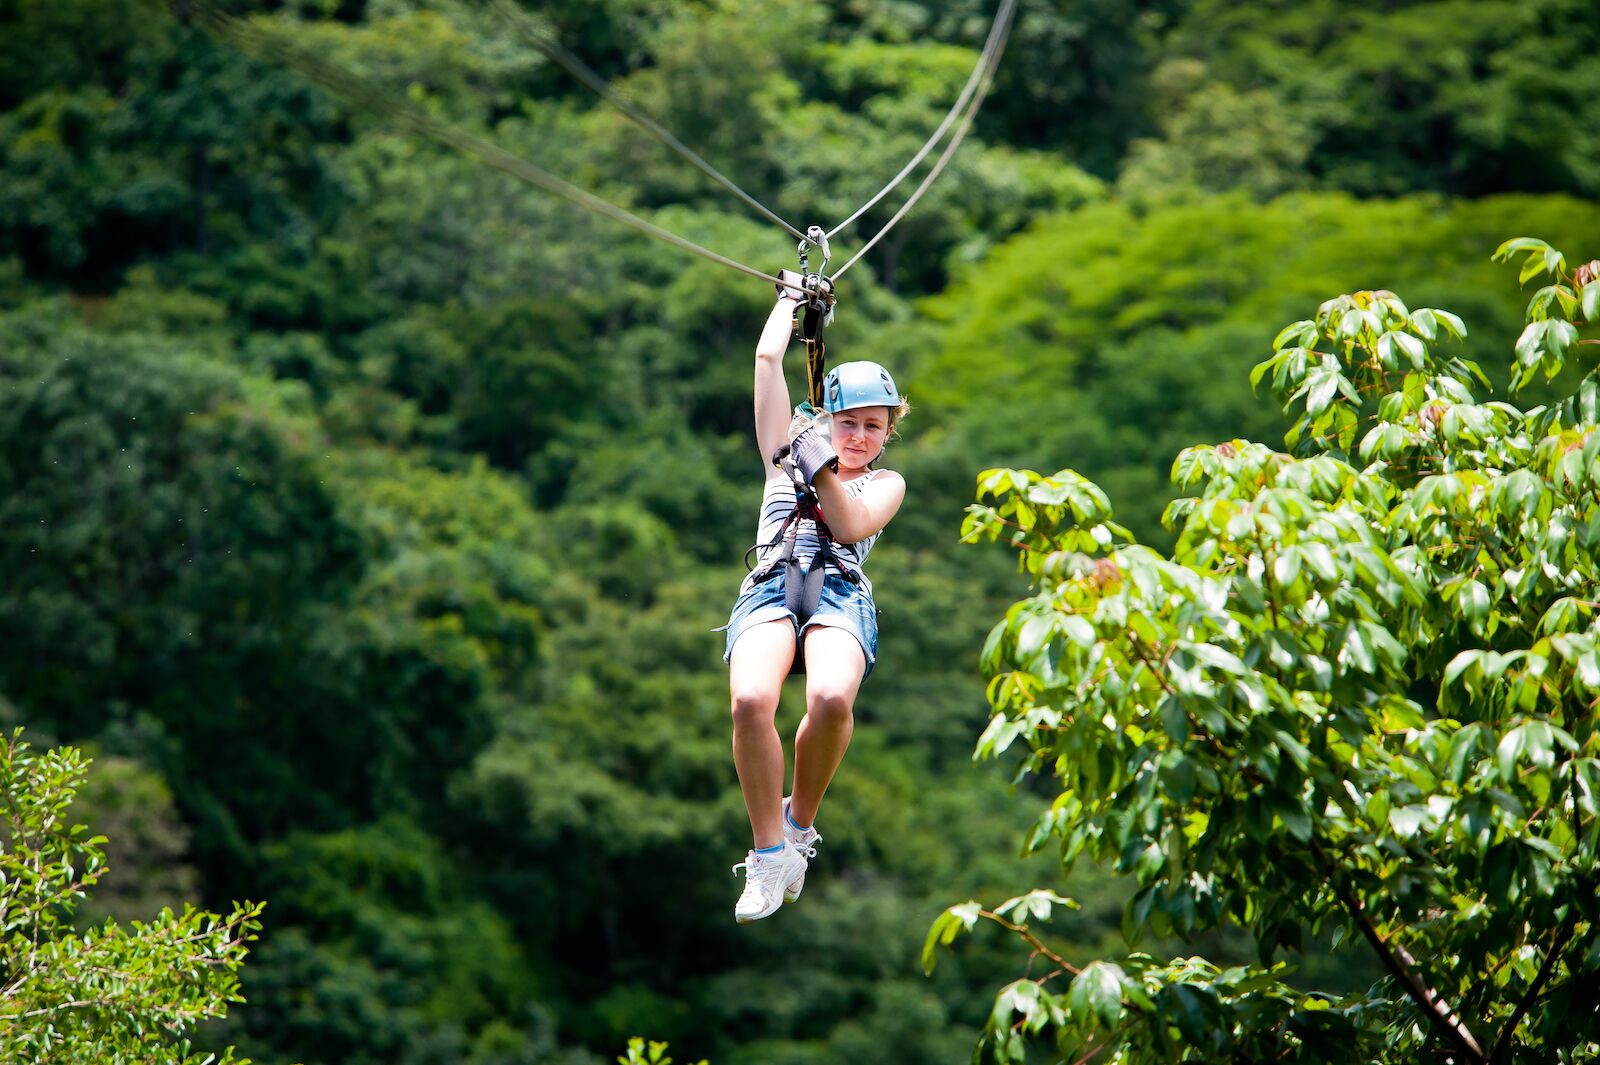 Ziplining above the forest floor in Costa Rica. Read on to know when is the best time to visit Costa Rica for an outdoor adventure